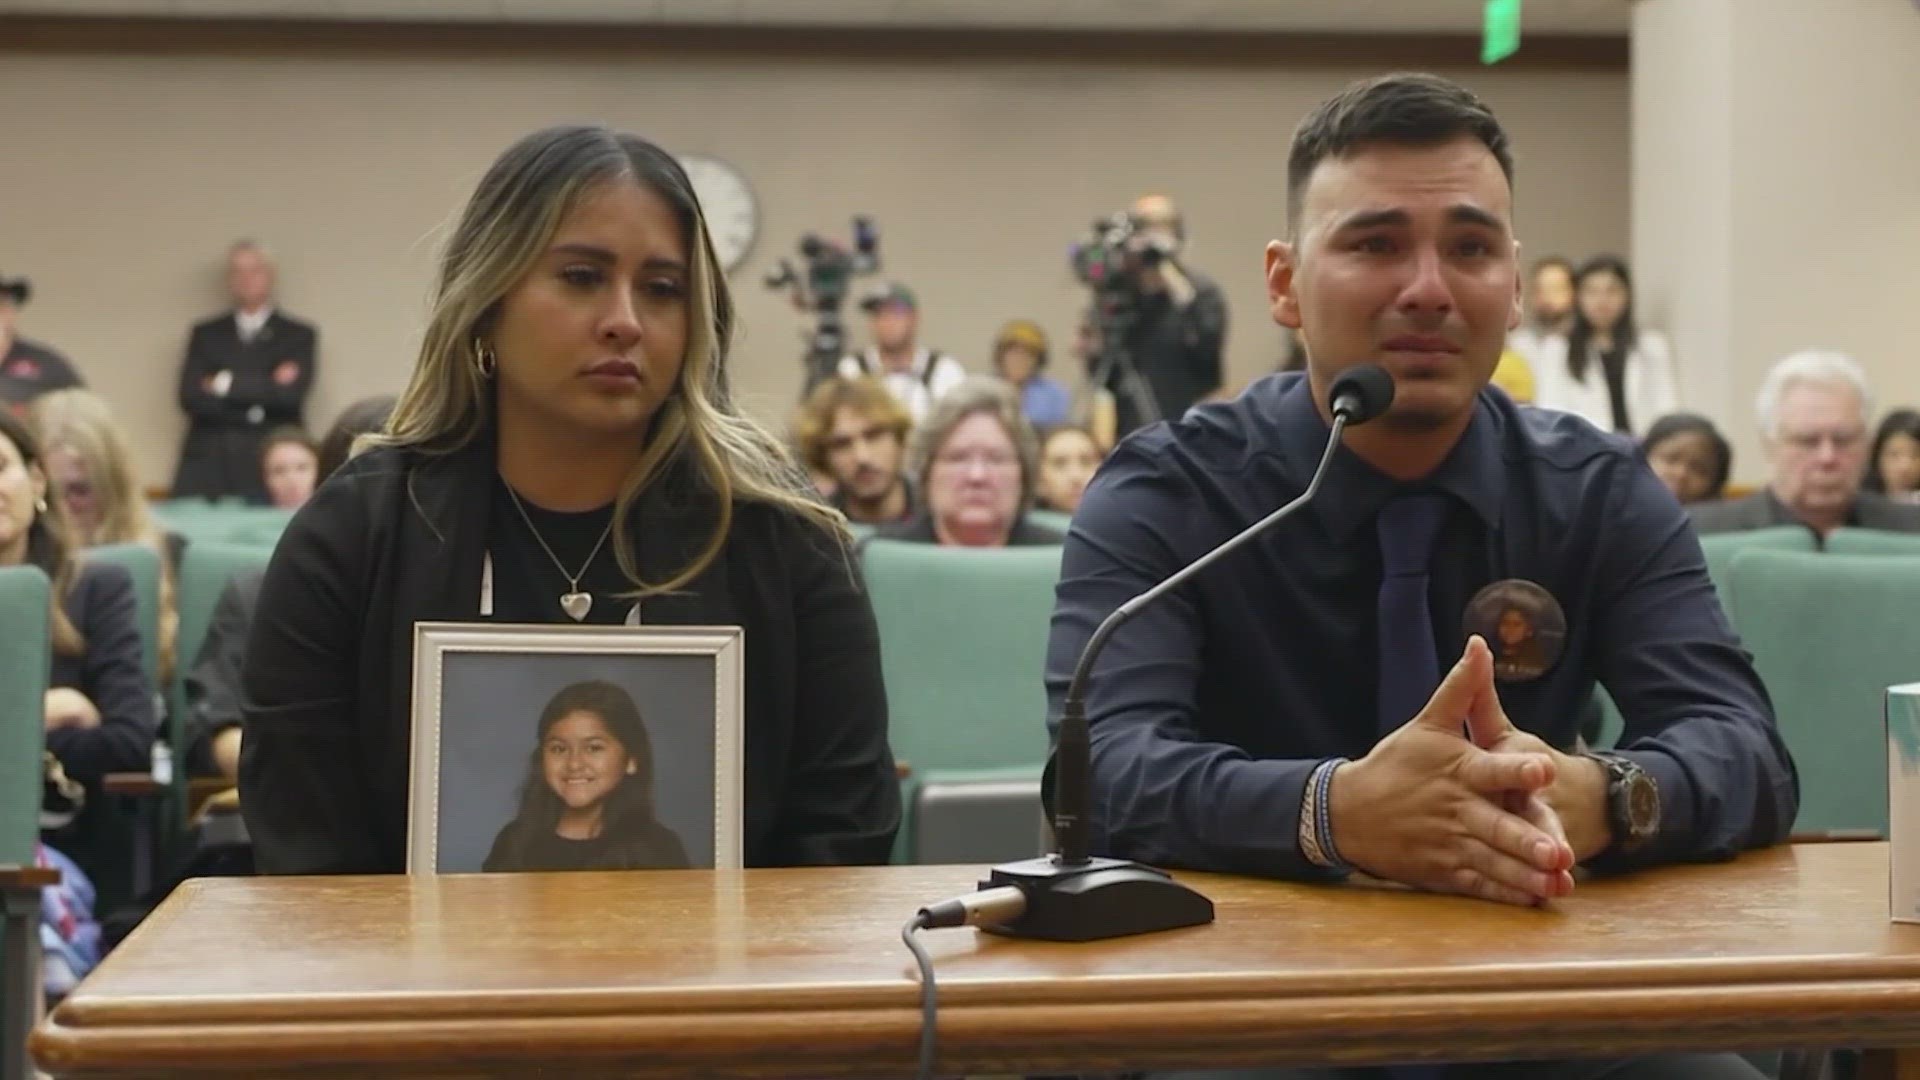 Texas House Bill 2744 would raise the age to buy a semi-automatic rifle from 18 to 21. Lawmakers became emotional during the testimony from parents.